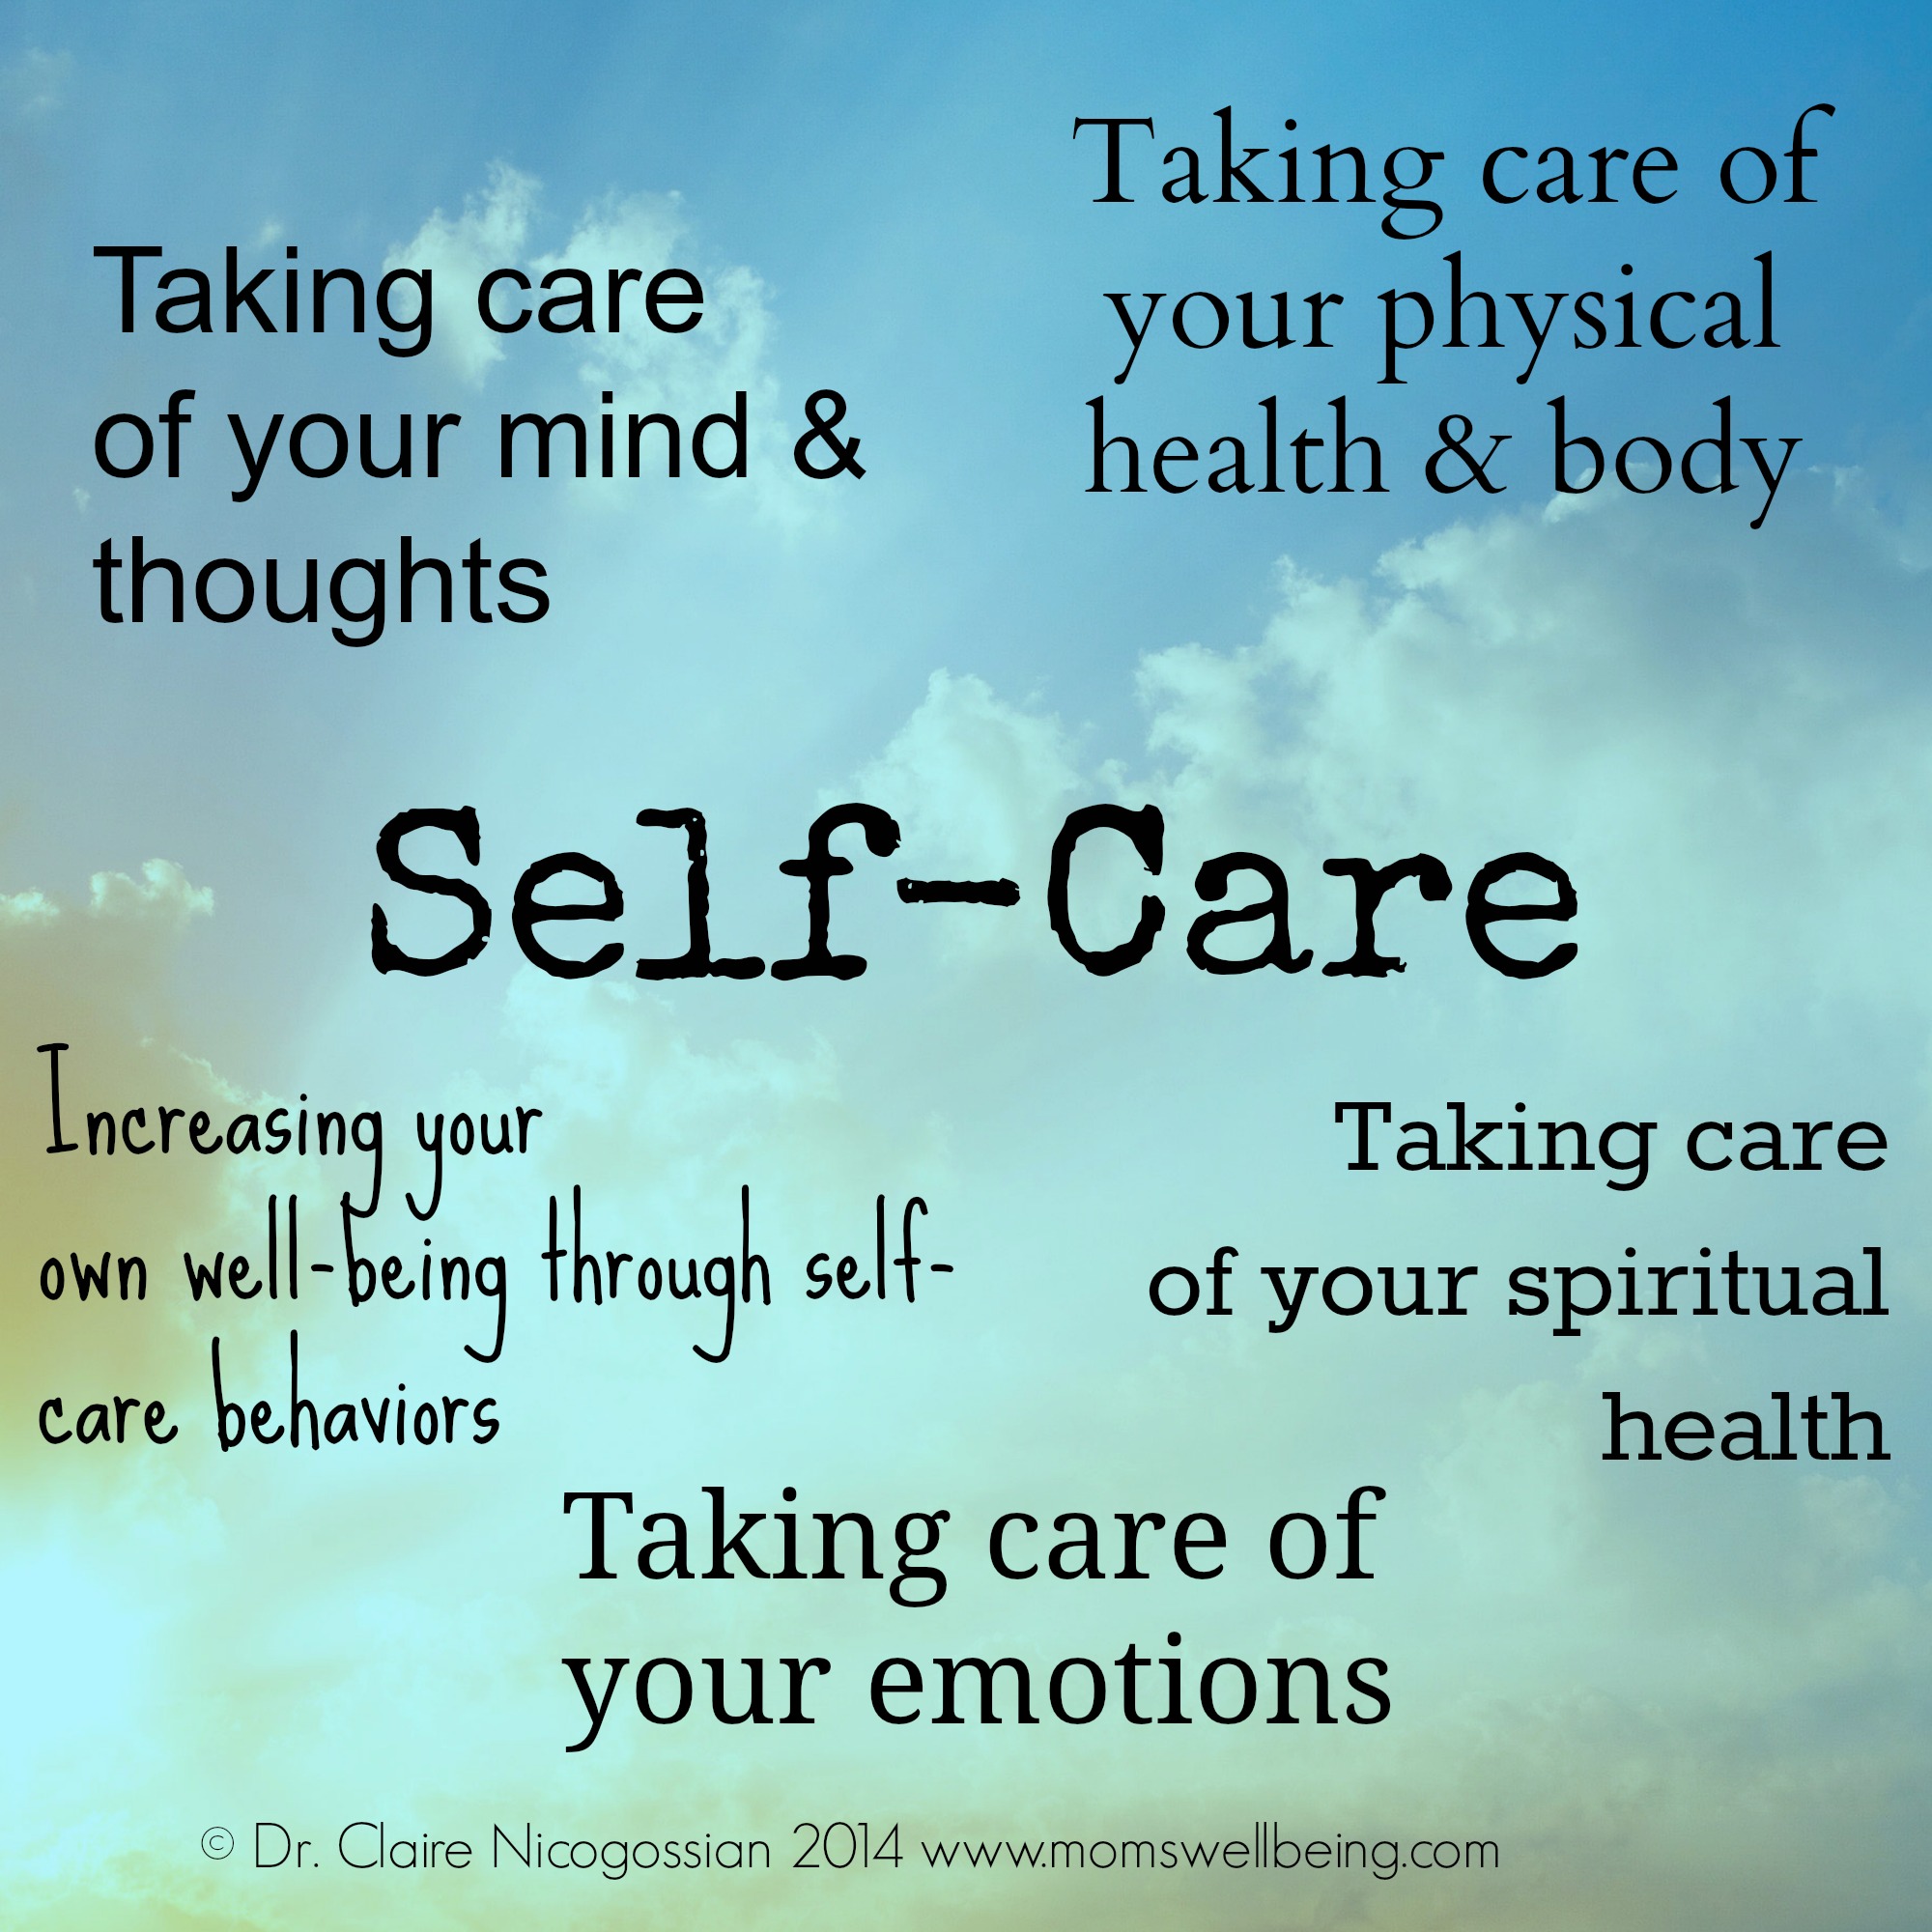 Taking care of self is self-care